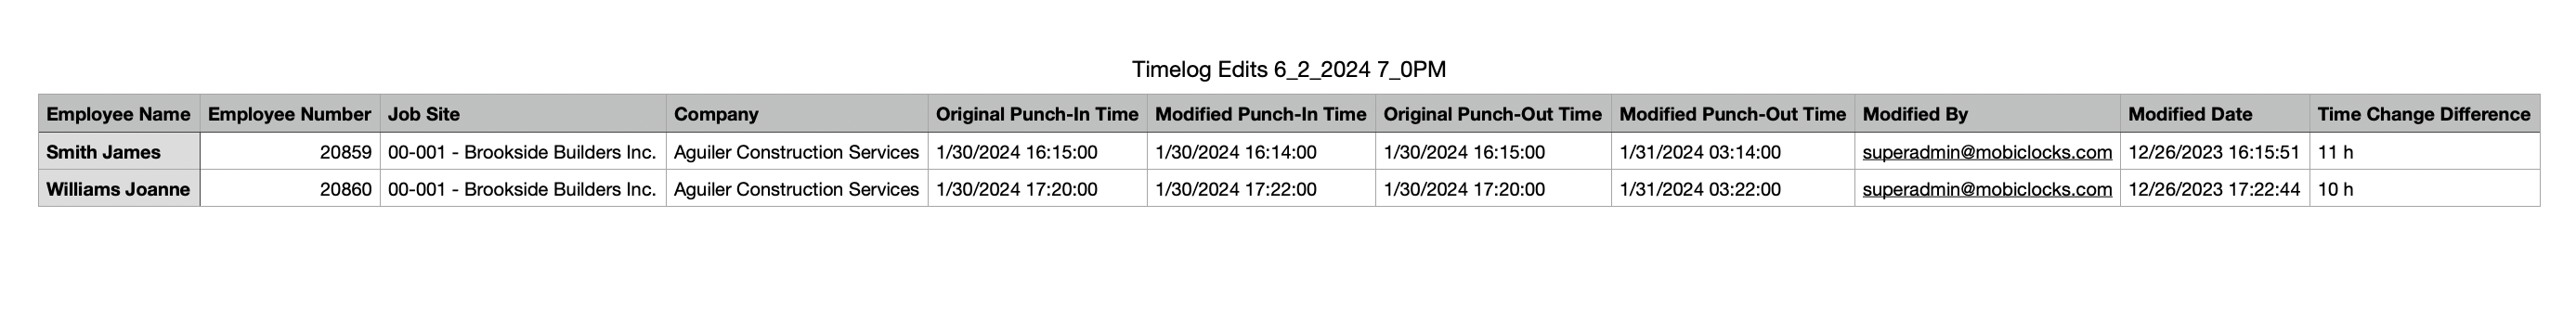 Timelog Edits report example